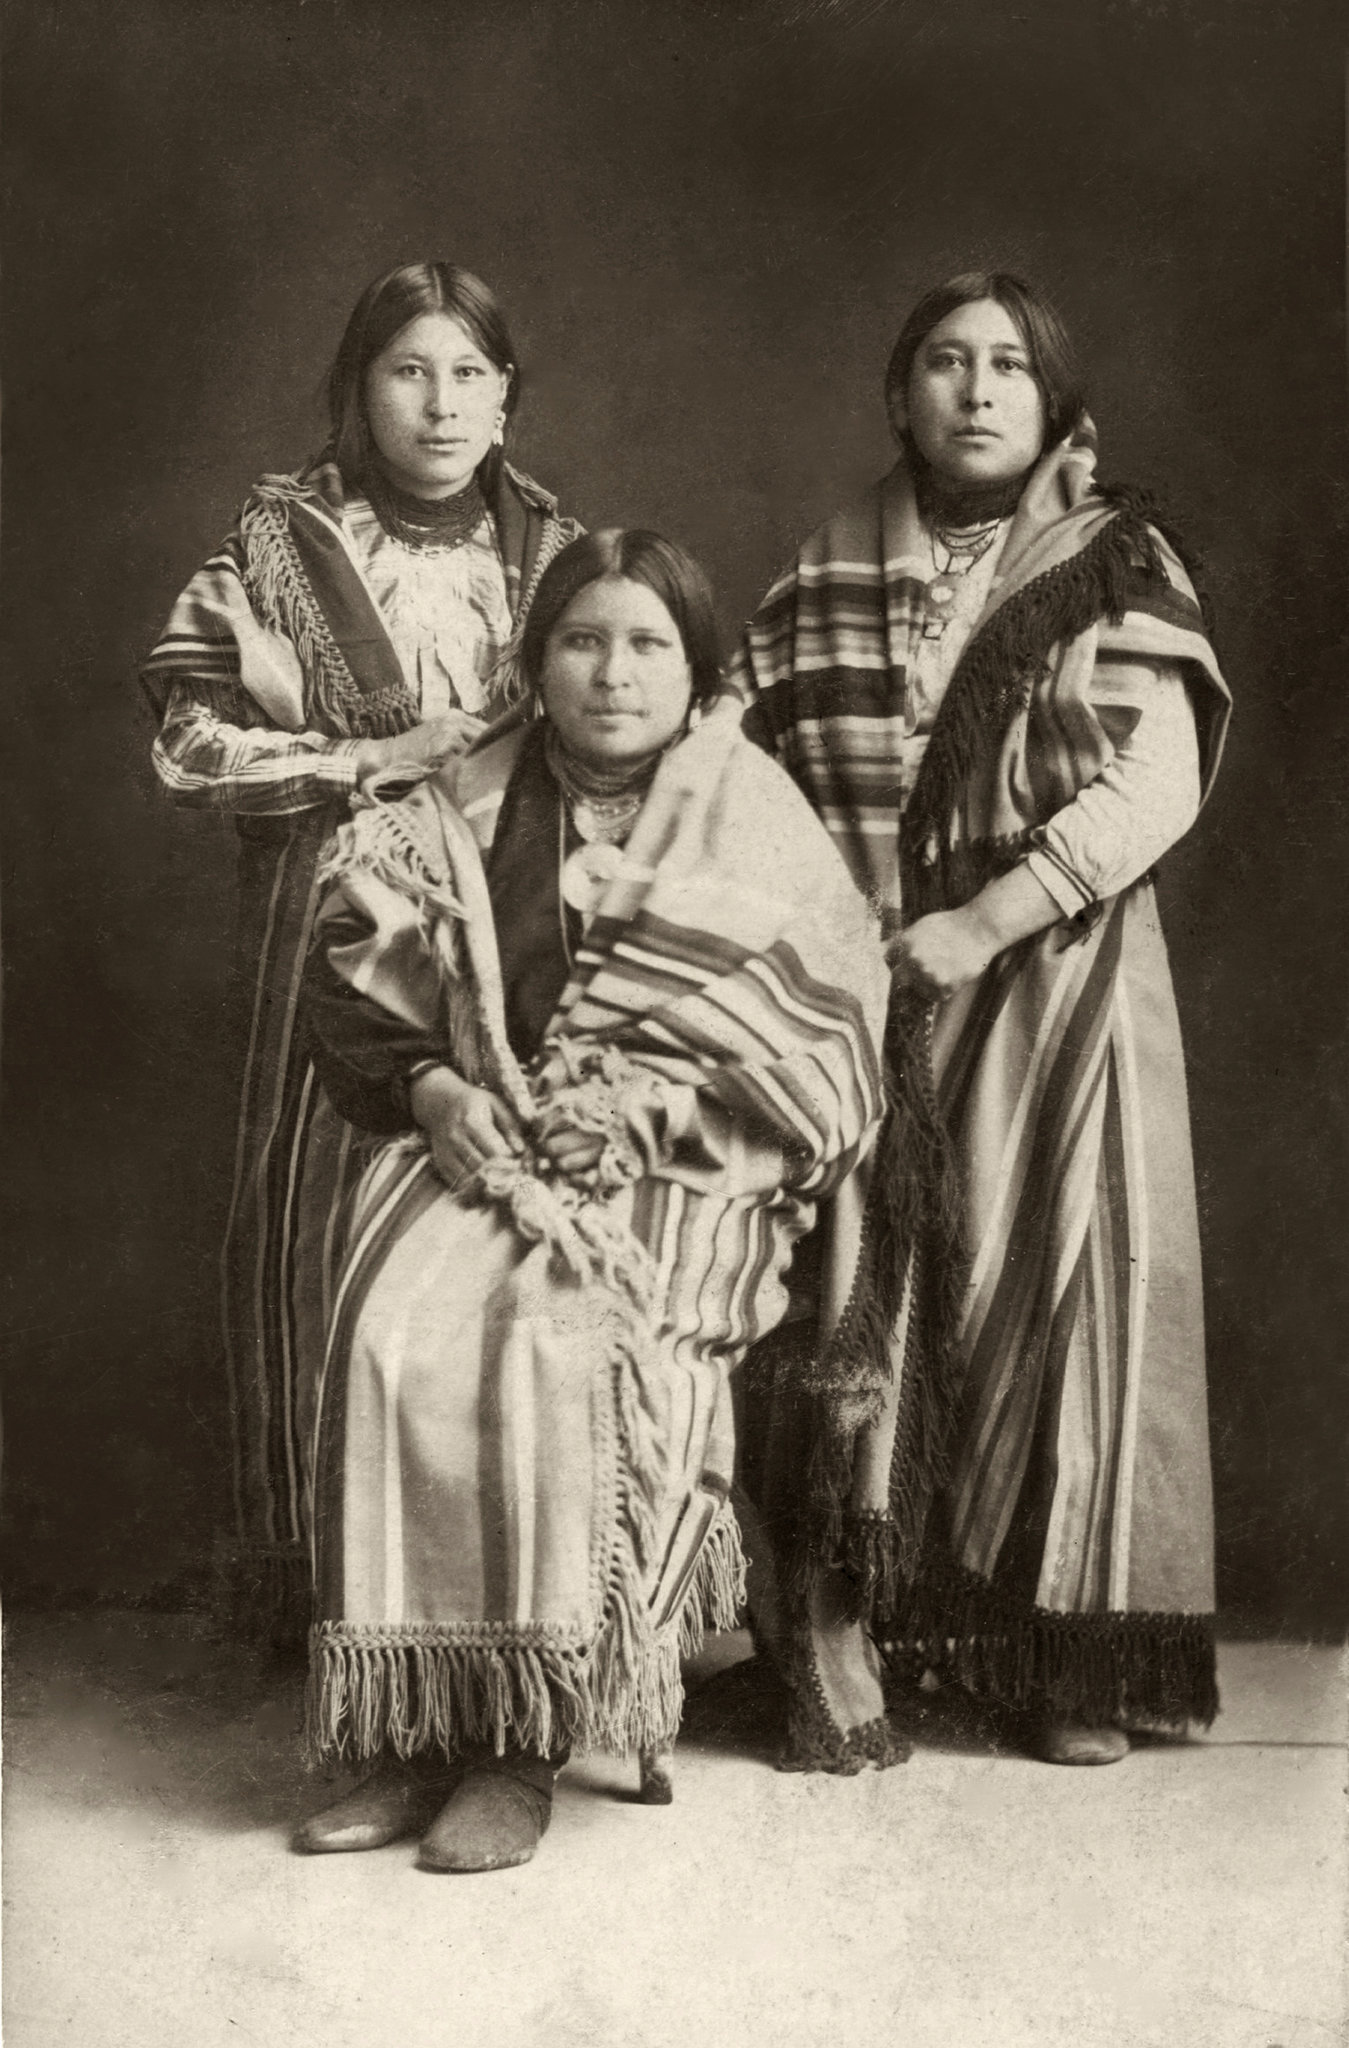 fascinating facts - The Osage Indians were once the richest per capita people in the world due to oil reserves on their land. Congress then passed a law requiring court appointed “guardians” to manage their wealth. Over 60 Osage were murdered from 1921-19